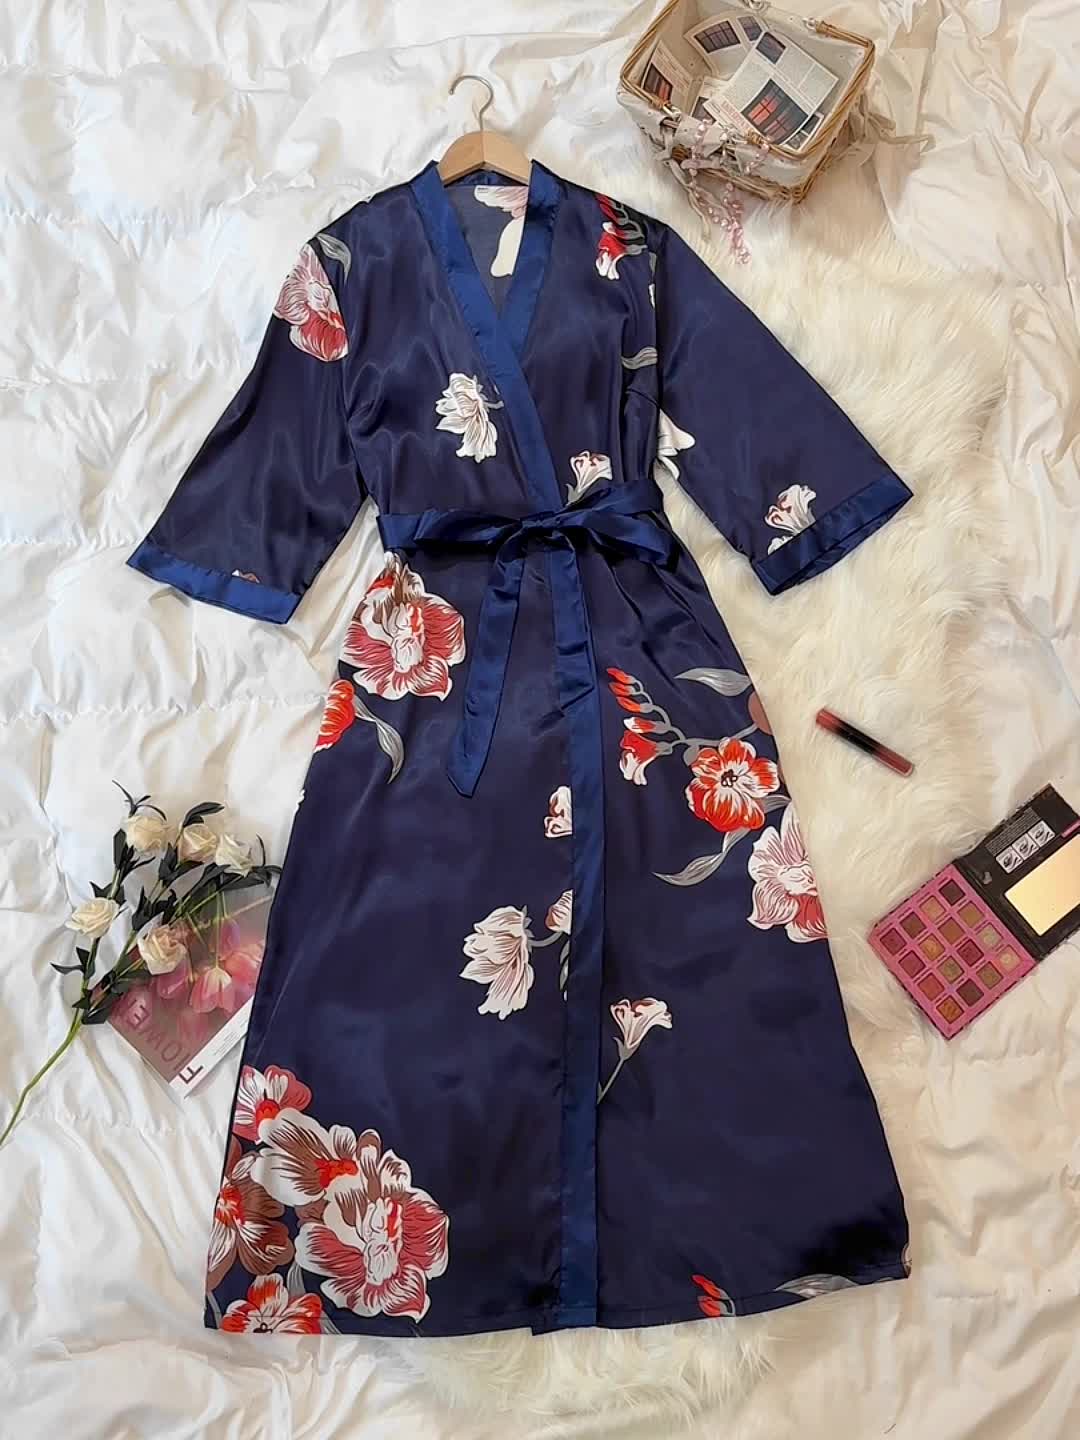 Wowens Plus Robes & Robe Sets Floral Sleepware Lounge Navy Blue 3XL